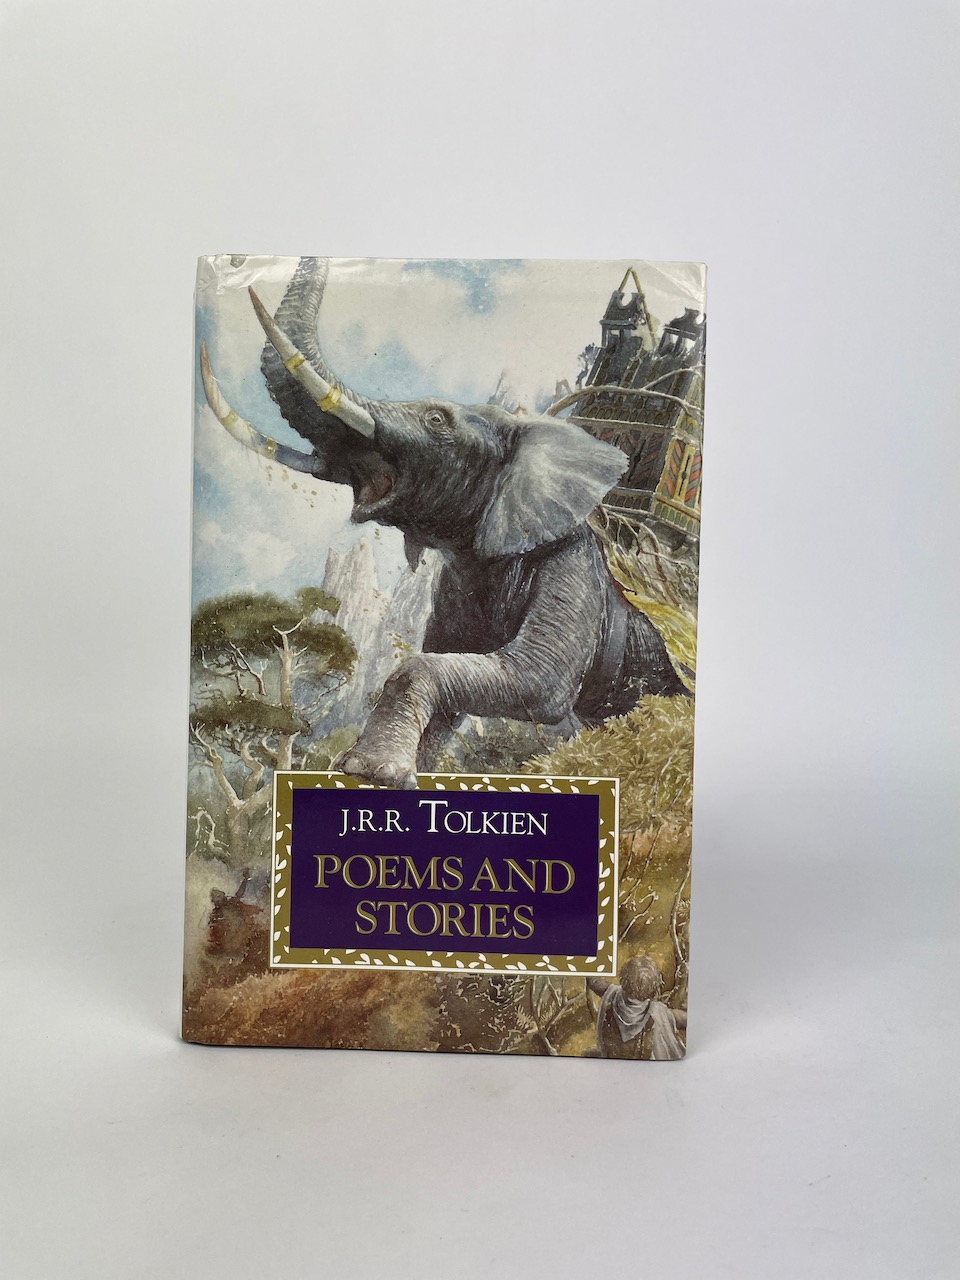 J.R.R. Tolkien: Poems and Stories, published by HarperCollins, London, 1992